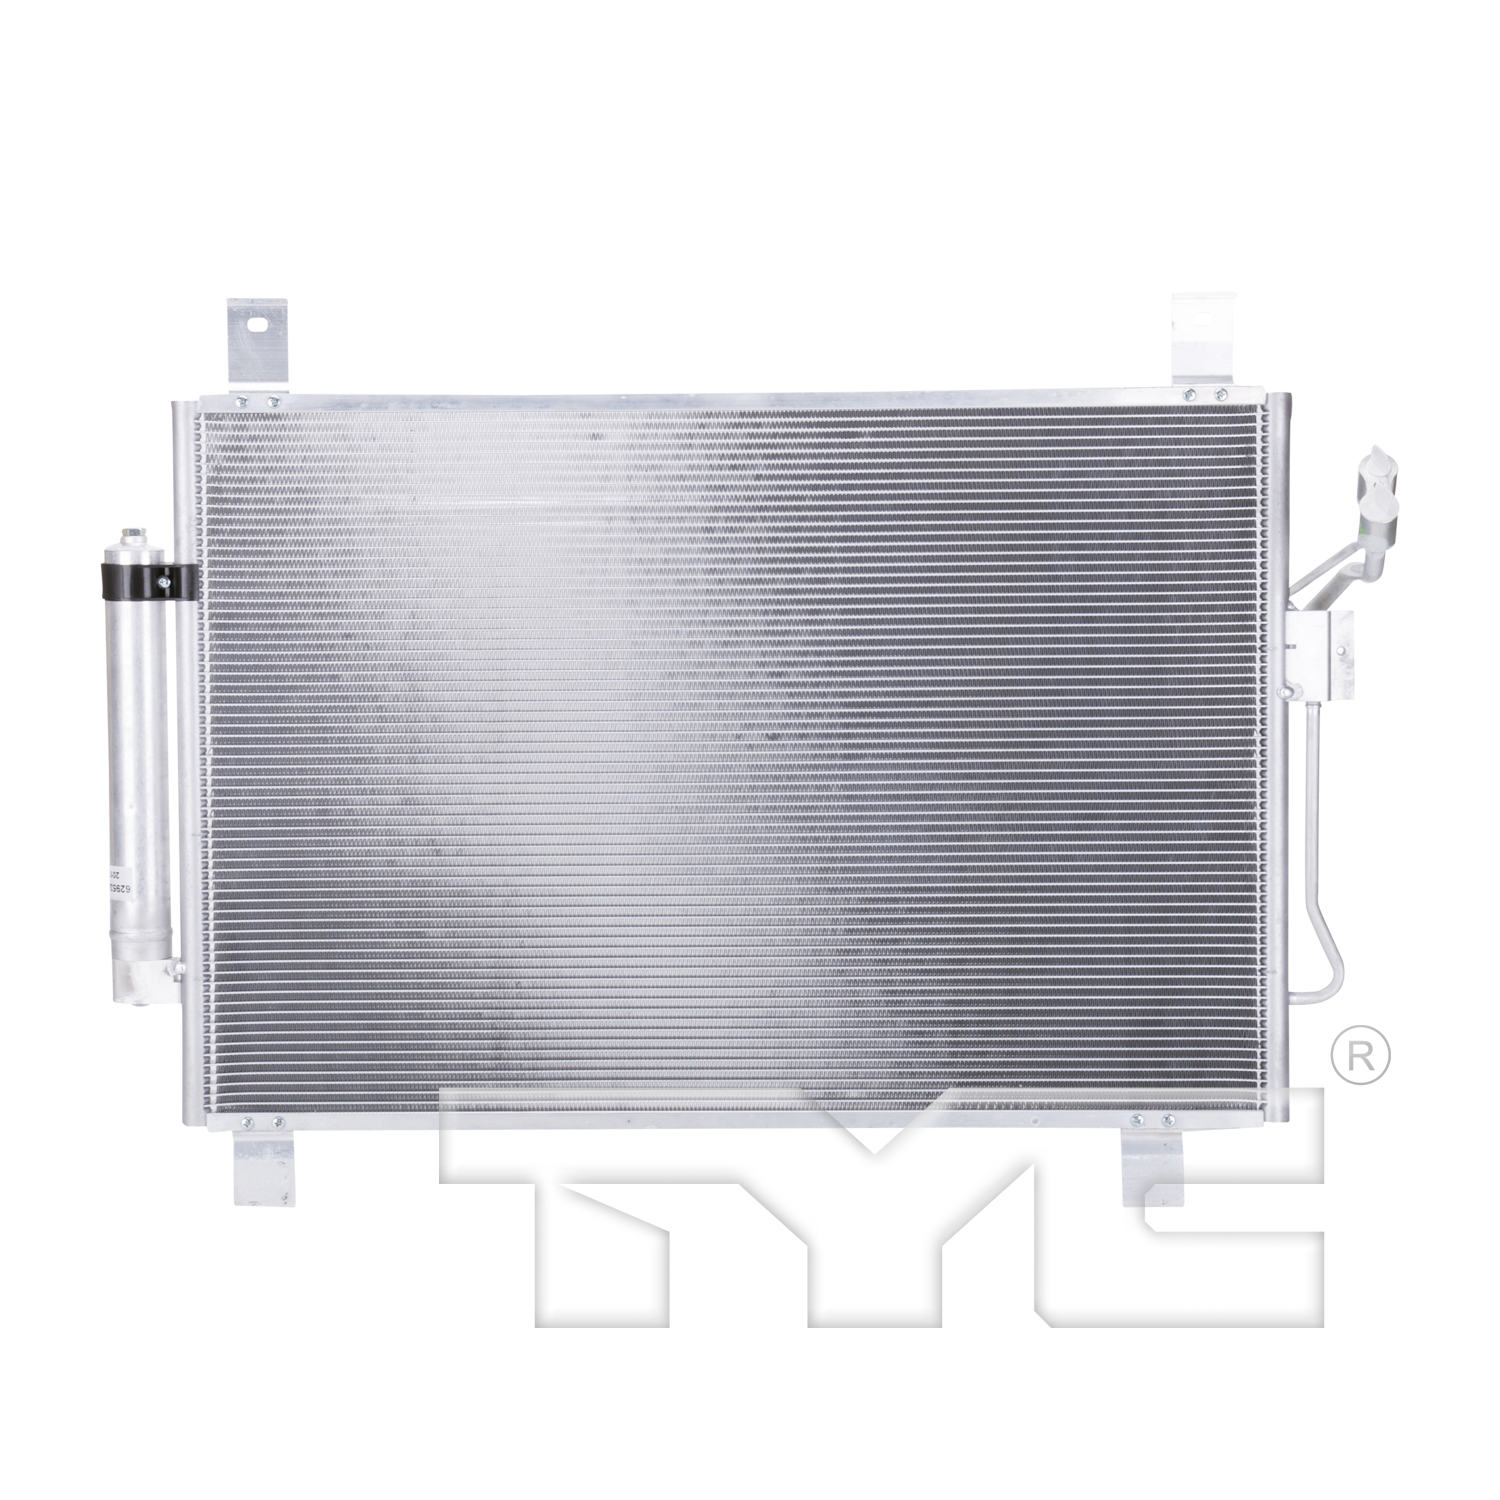 Aftermarket AC CONDENSERS for INFINITI - JX35, JX35,13-13,Air conditioning condenser